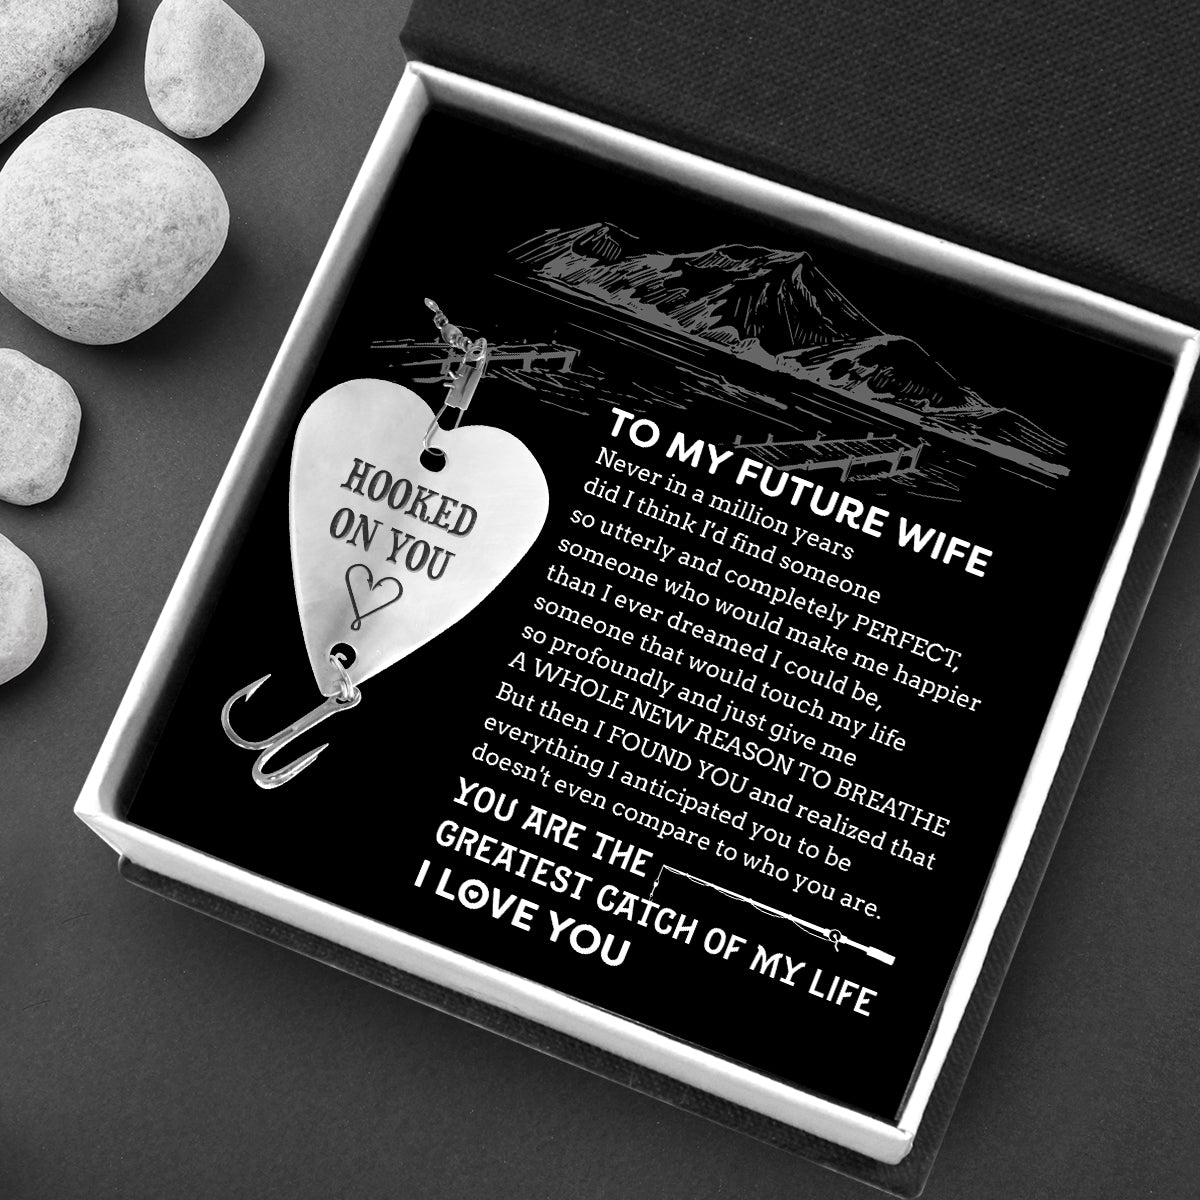 Heart Fishing Lure - To My Future Wife - You Are The Greatest Catch Of My Life - Ukgfc25001